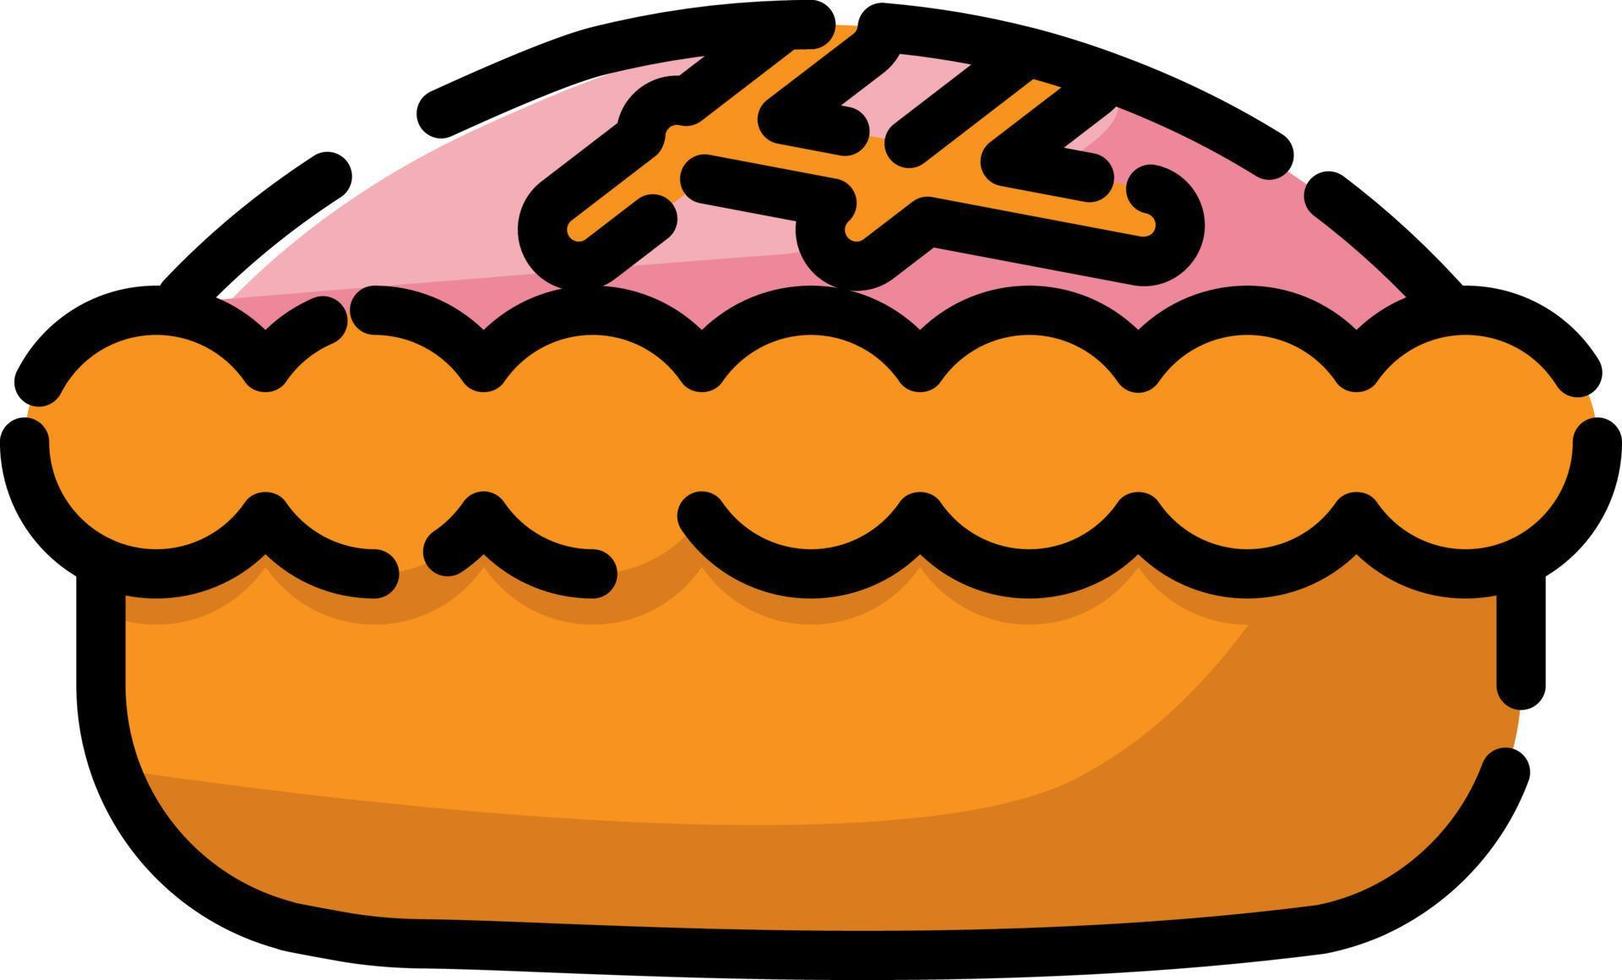 Baked pie, illustration, vector on a white background.